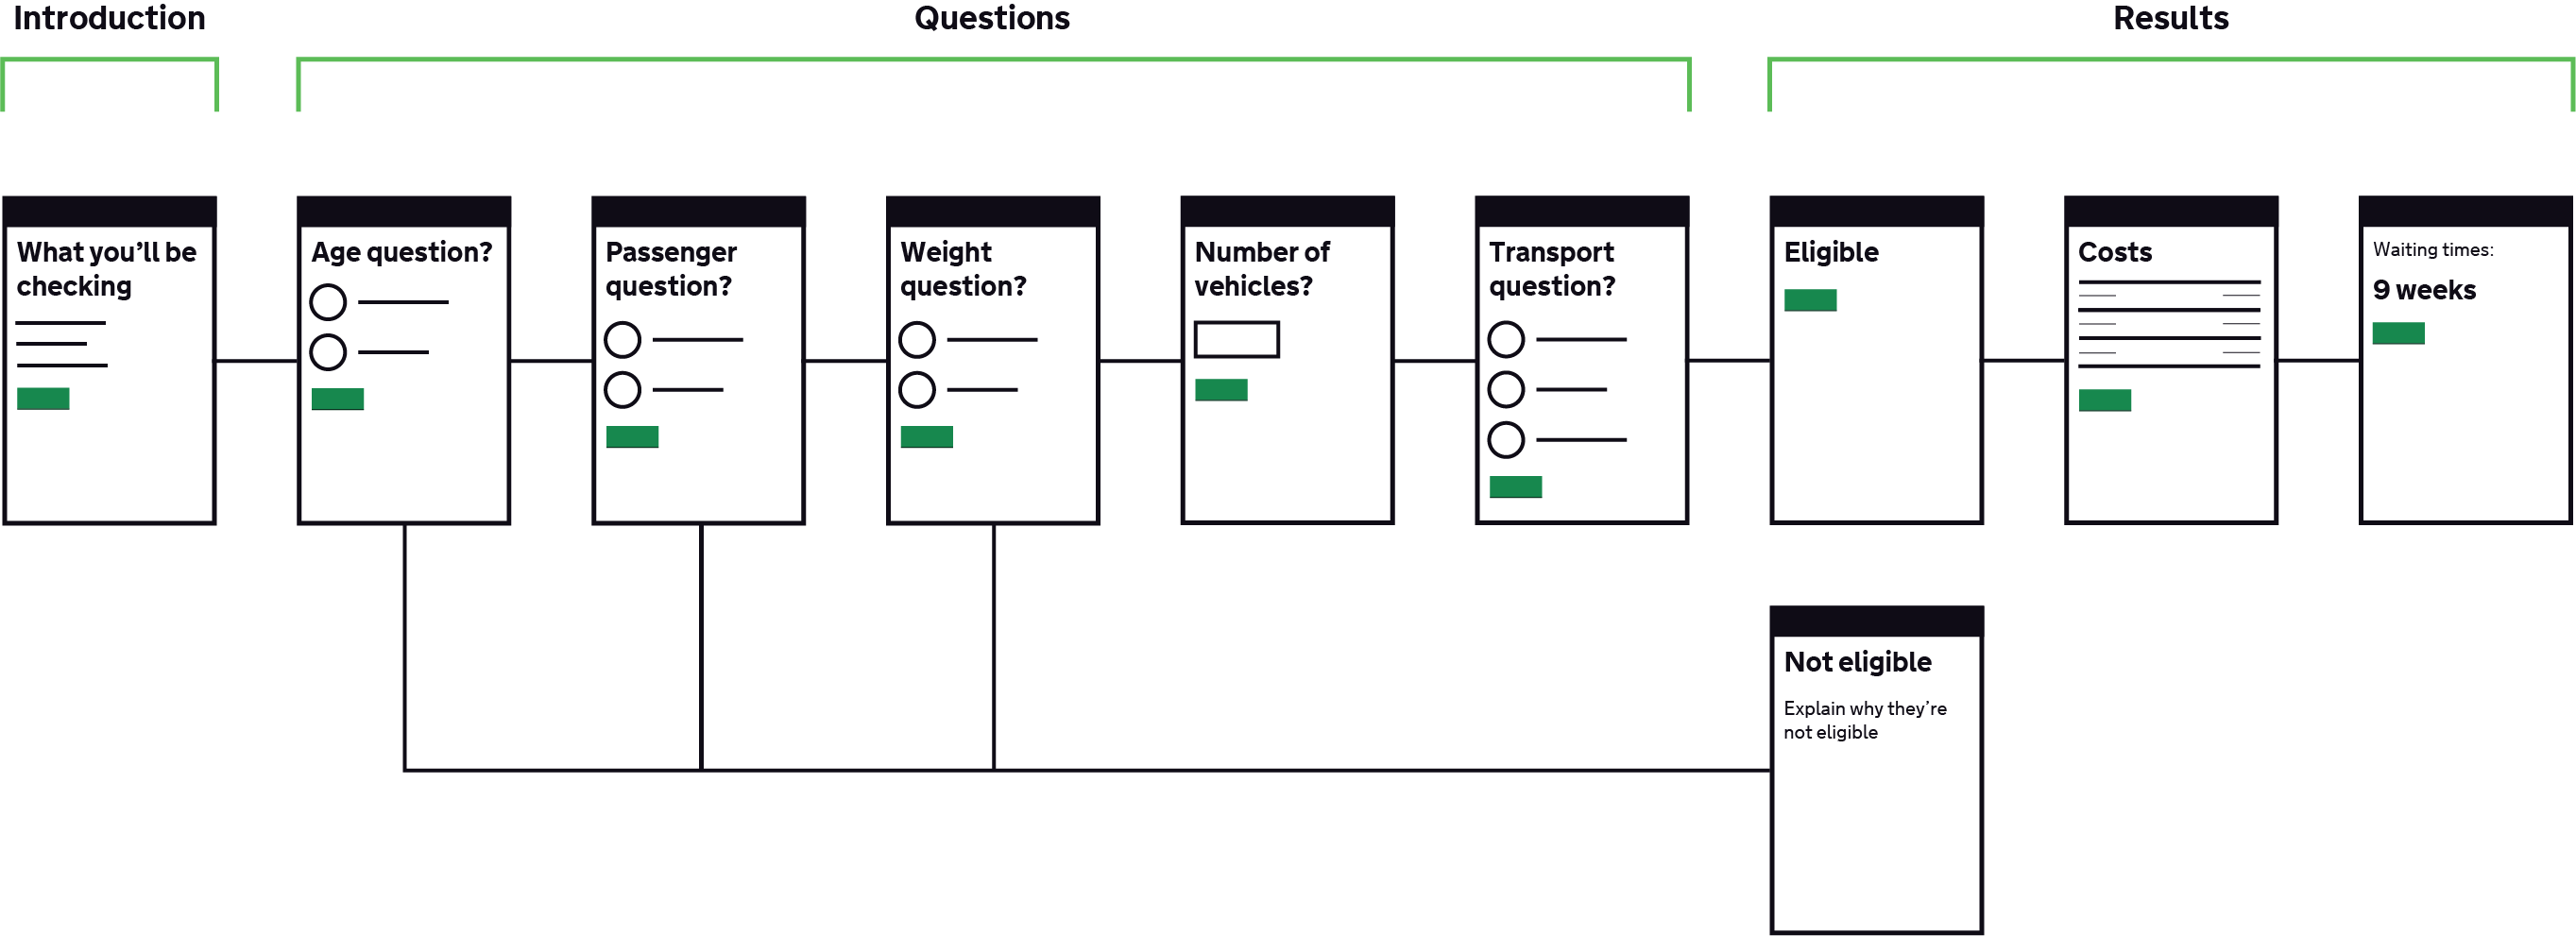 ‘Check a service is suitable’ flow diagram. Contains an introduction page followed by a series of simple questions. If at any point a user is deemed not eligible for the service they will be pointed to a page that explains why they are not eligible. Otherwise they will be presented a ‘results’ page. 